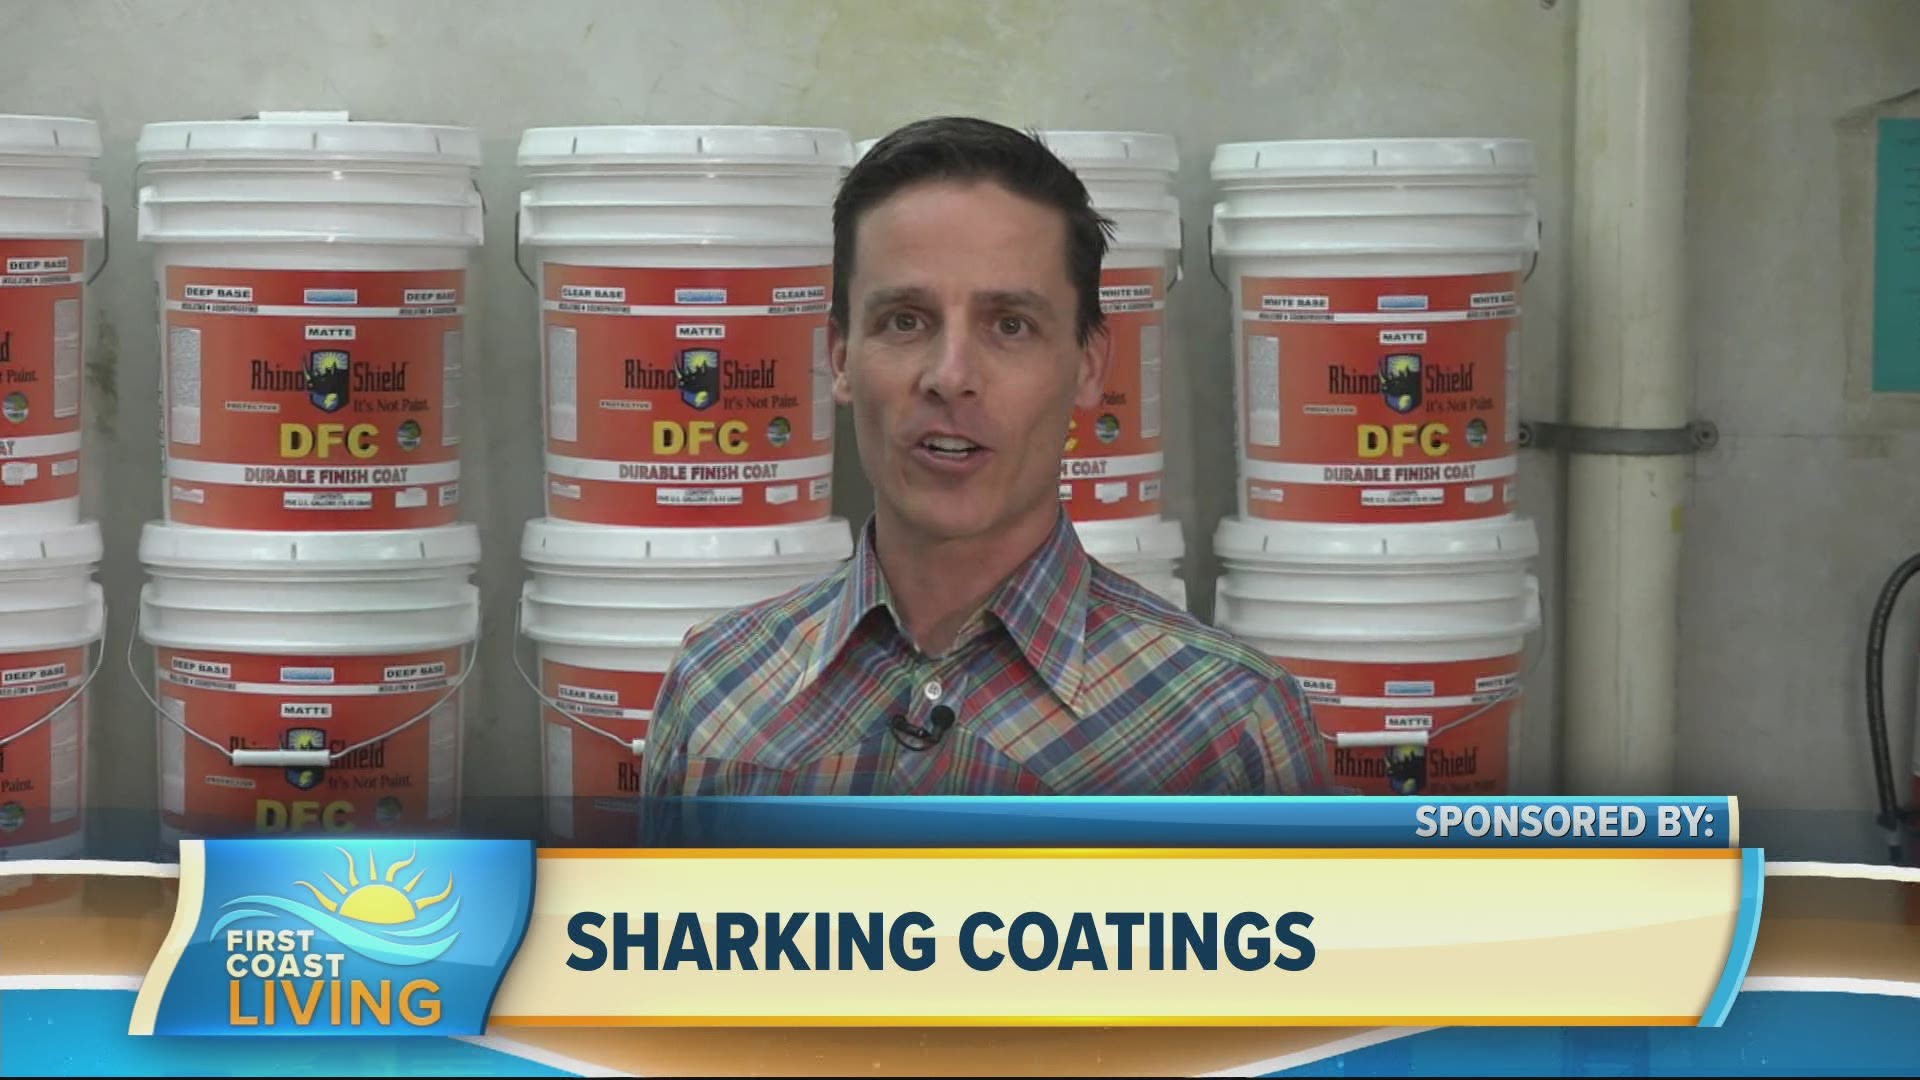 See how Shark Coatings can give your home an updated look.